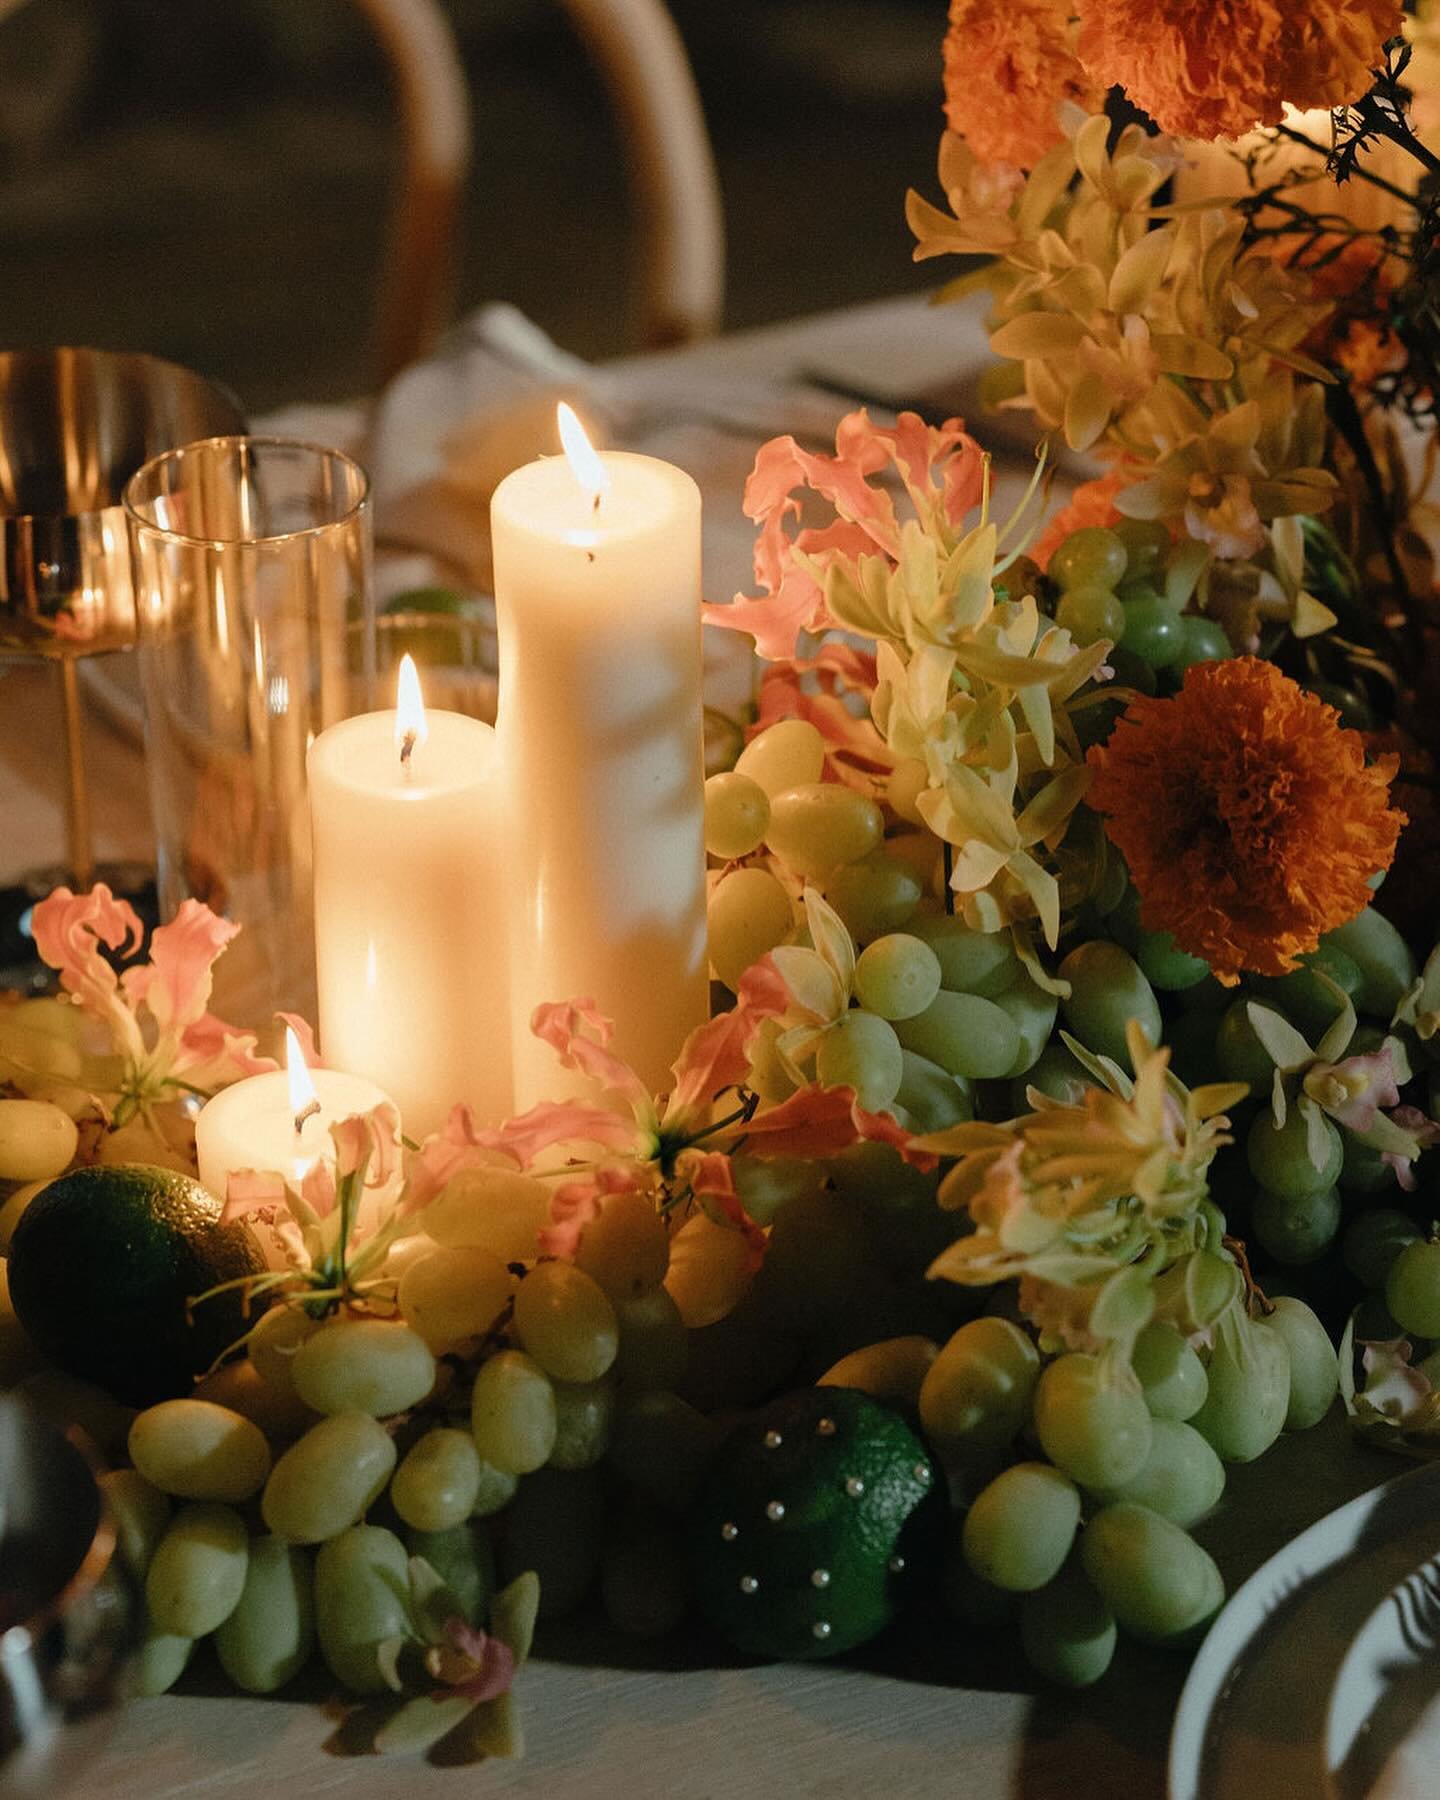 I woke up battling a sore throat and started downing ginger and lemons like it&rsquo;s my day job so I&rsquo;m choosing to romanticize the situation with this vitamin C inspired table scape.

Photo: @madelinebarrphoto 
Table &amp; floral design: @flo